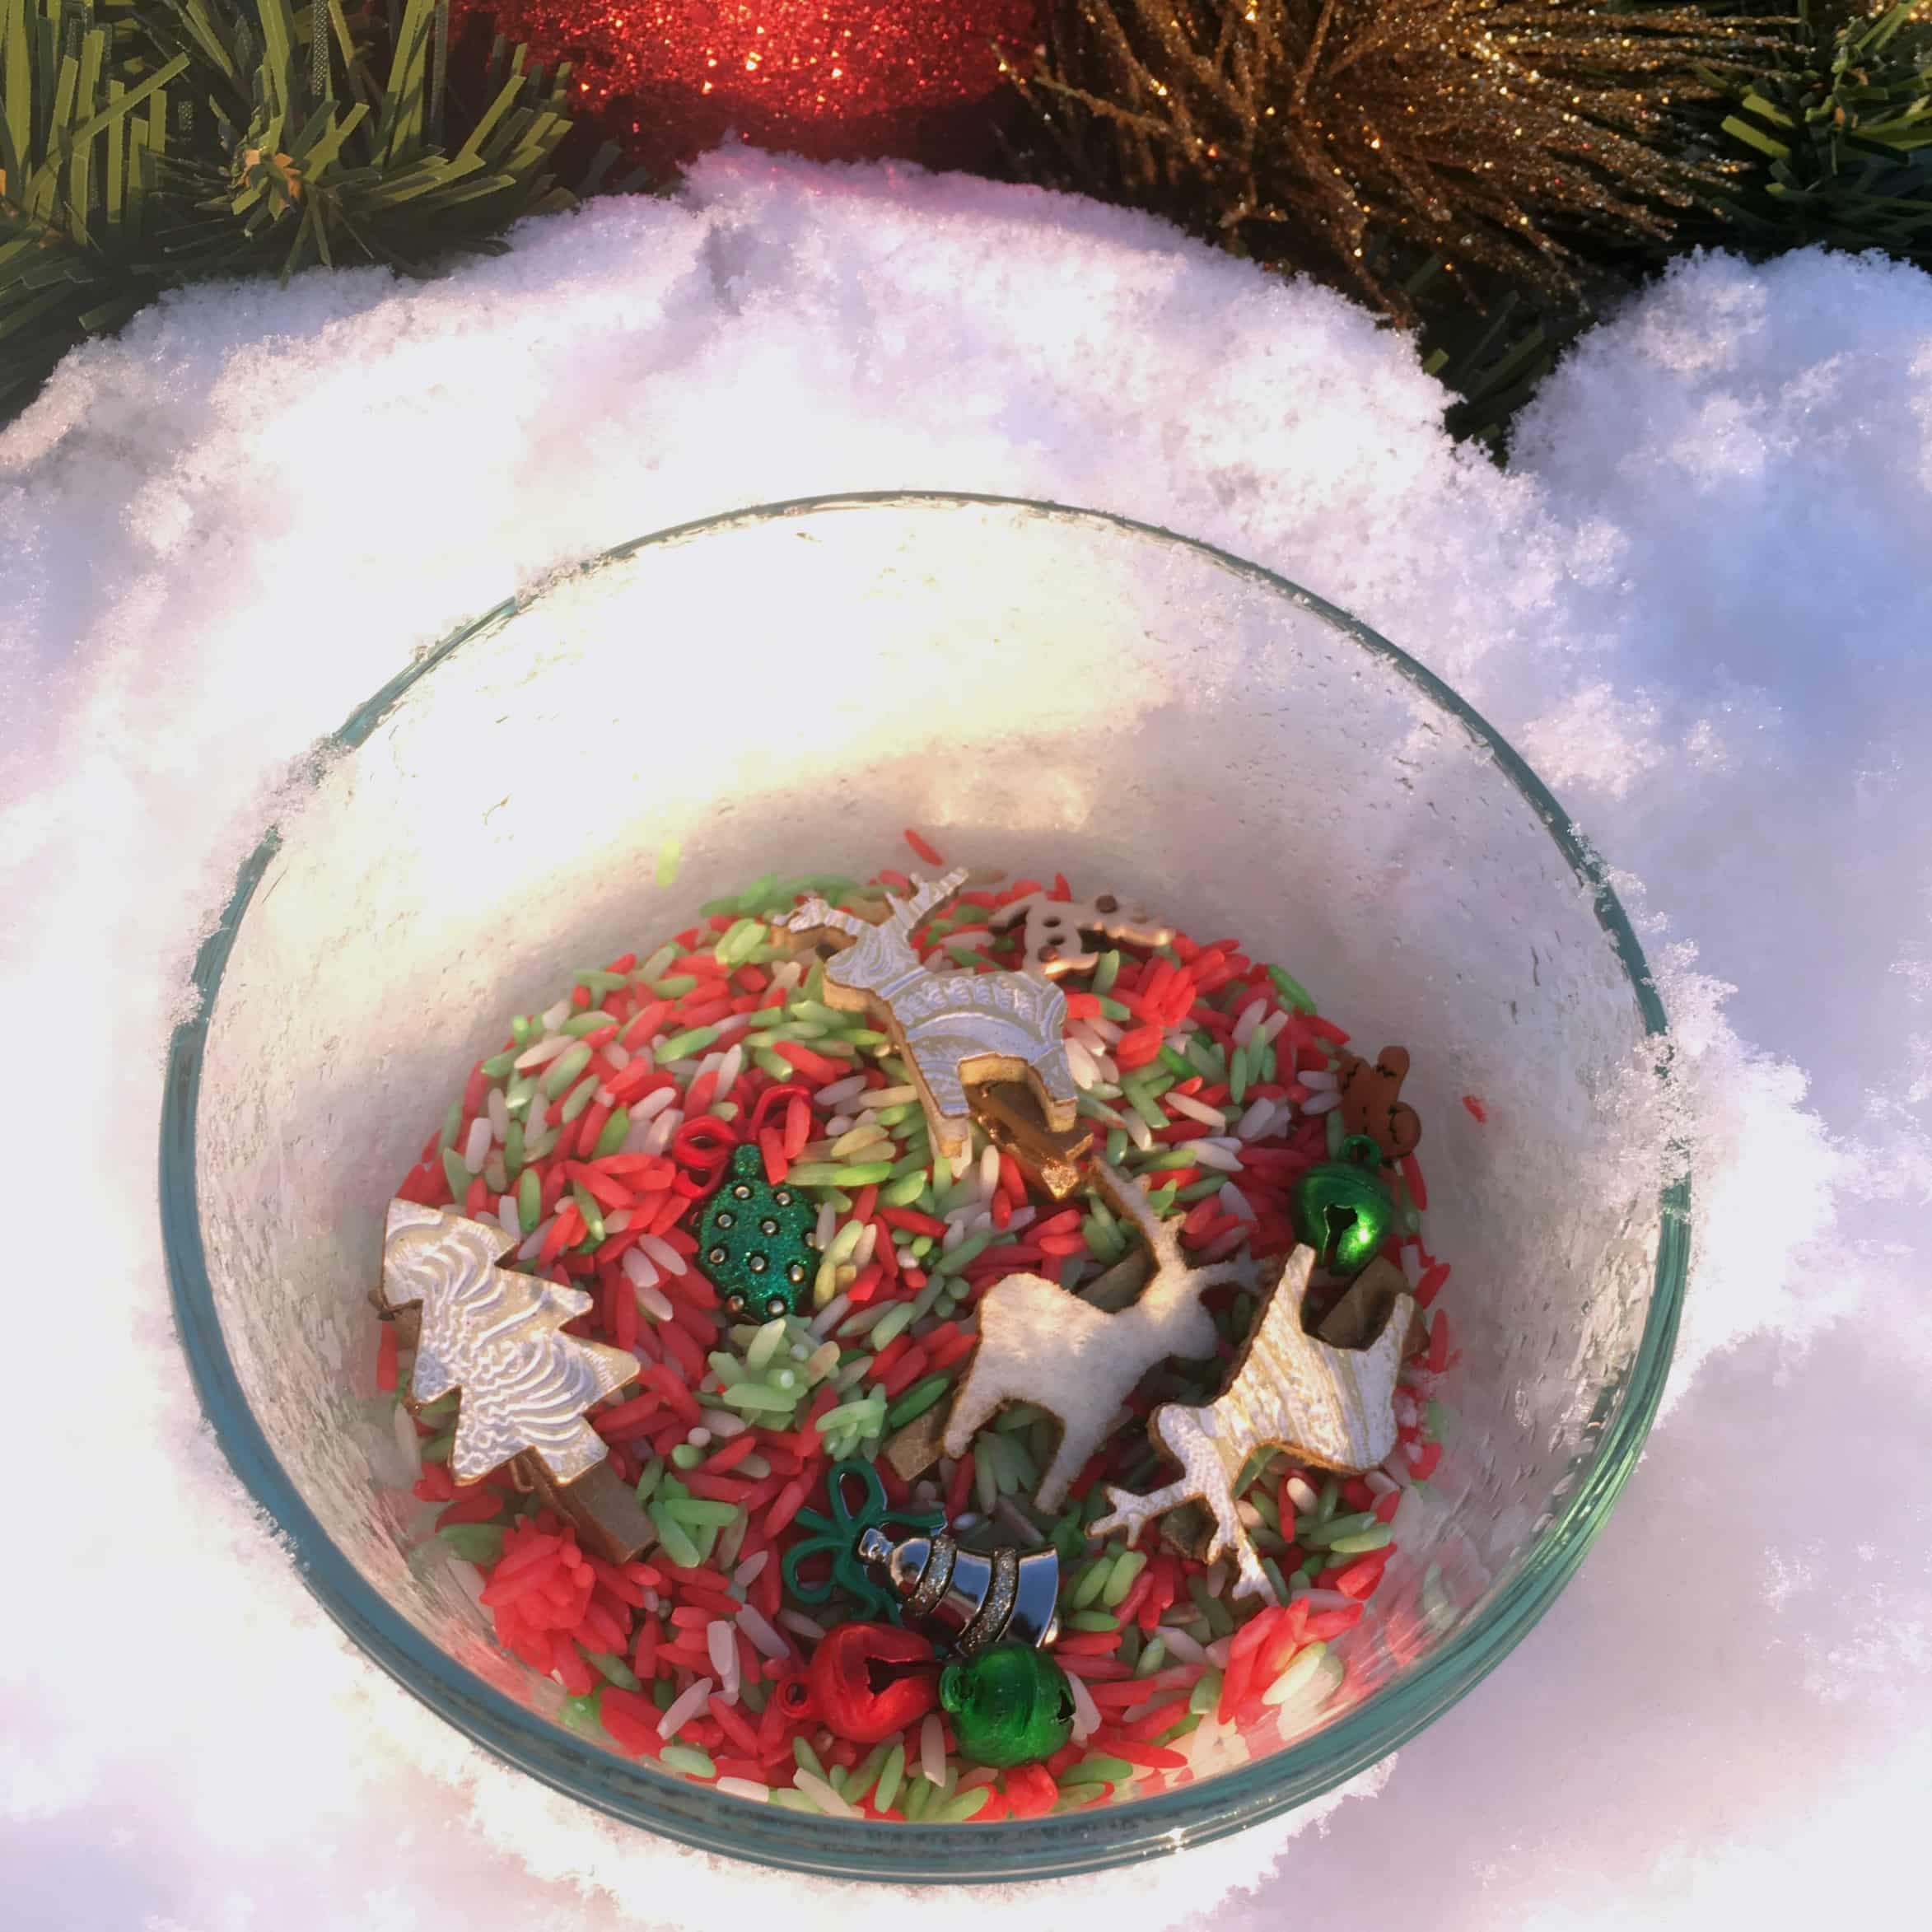 Have fun with a Holiday-themed sensory bin by making coloured rice. Also find out the benefits of sensory play and other simple sensory bin ideas in this Christmas sensory bin post. The recipe is really simple to follow and smells like peppermint! Great for early childhood education, play-based learning, learning through play and more.